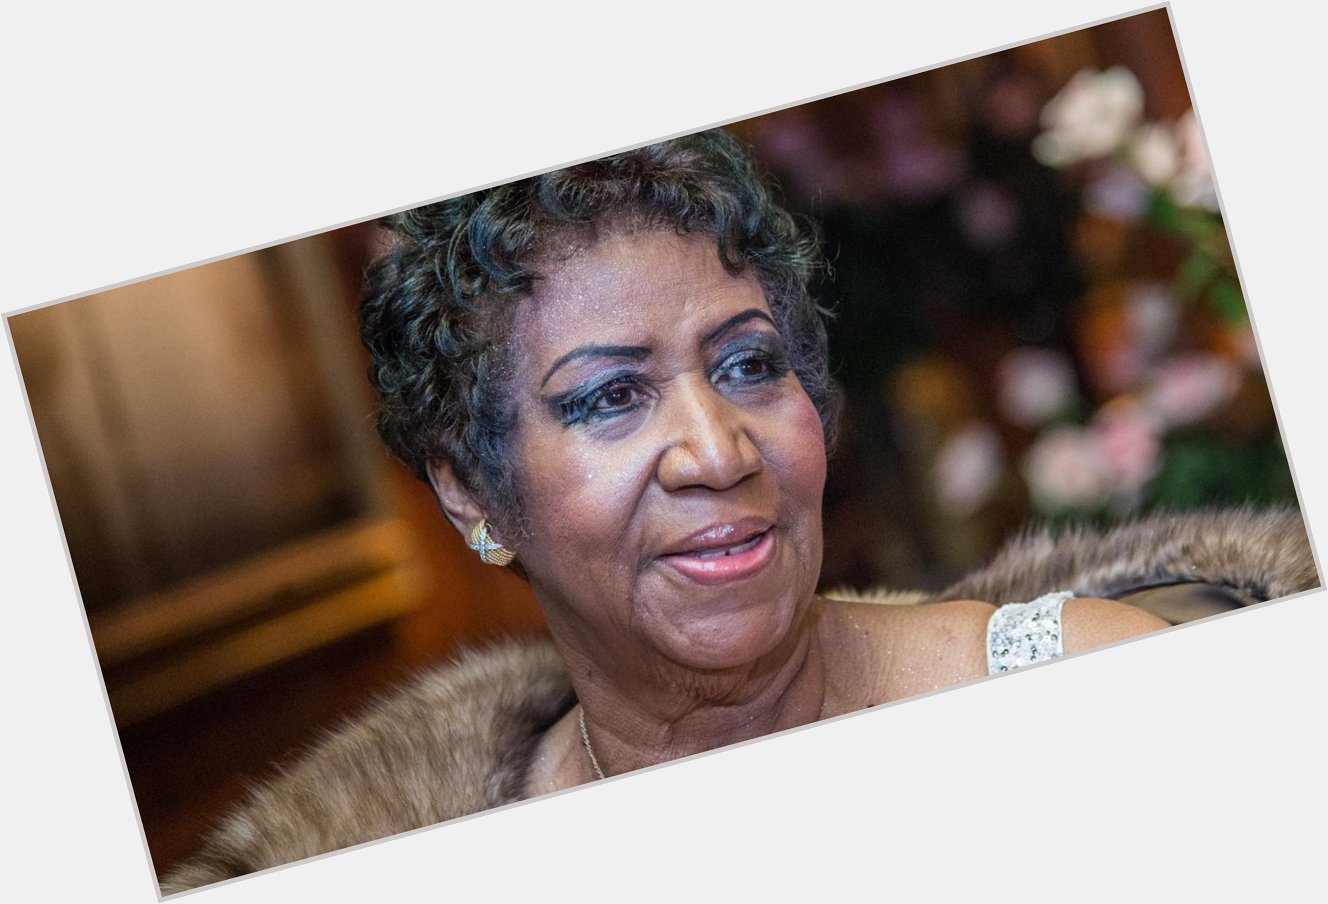 Happy Birthday Aretha Franklin! Forever our Queen of Soul 